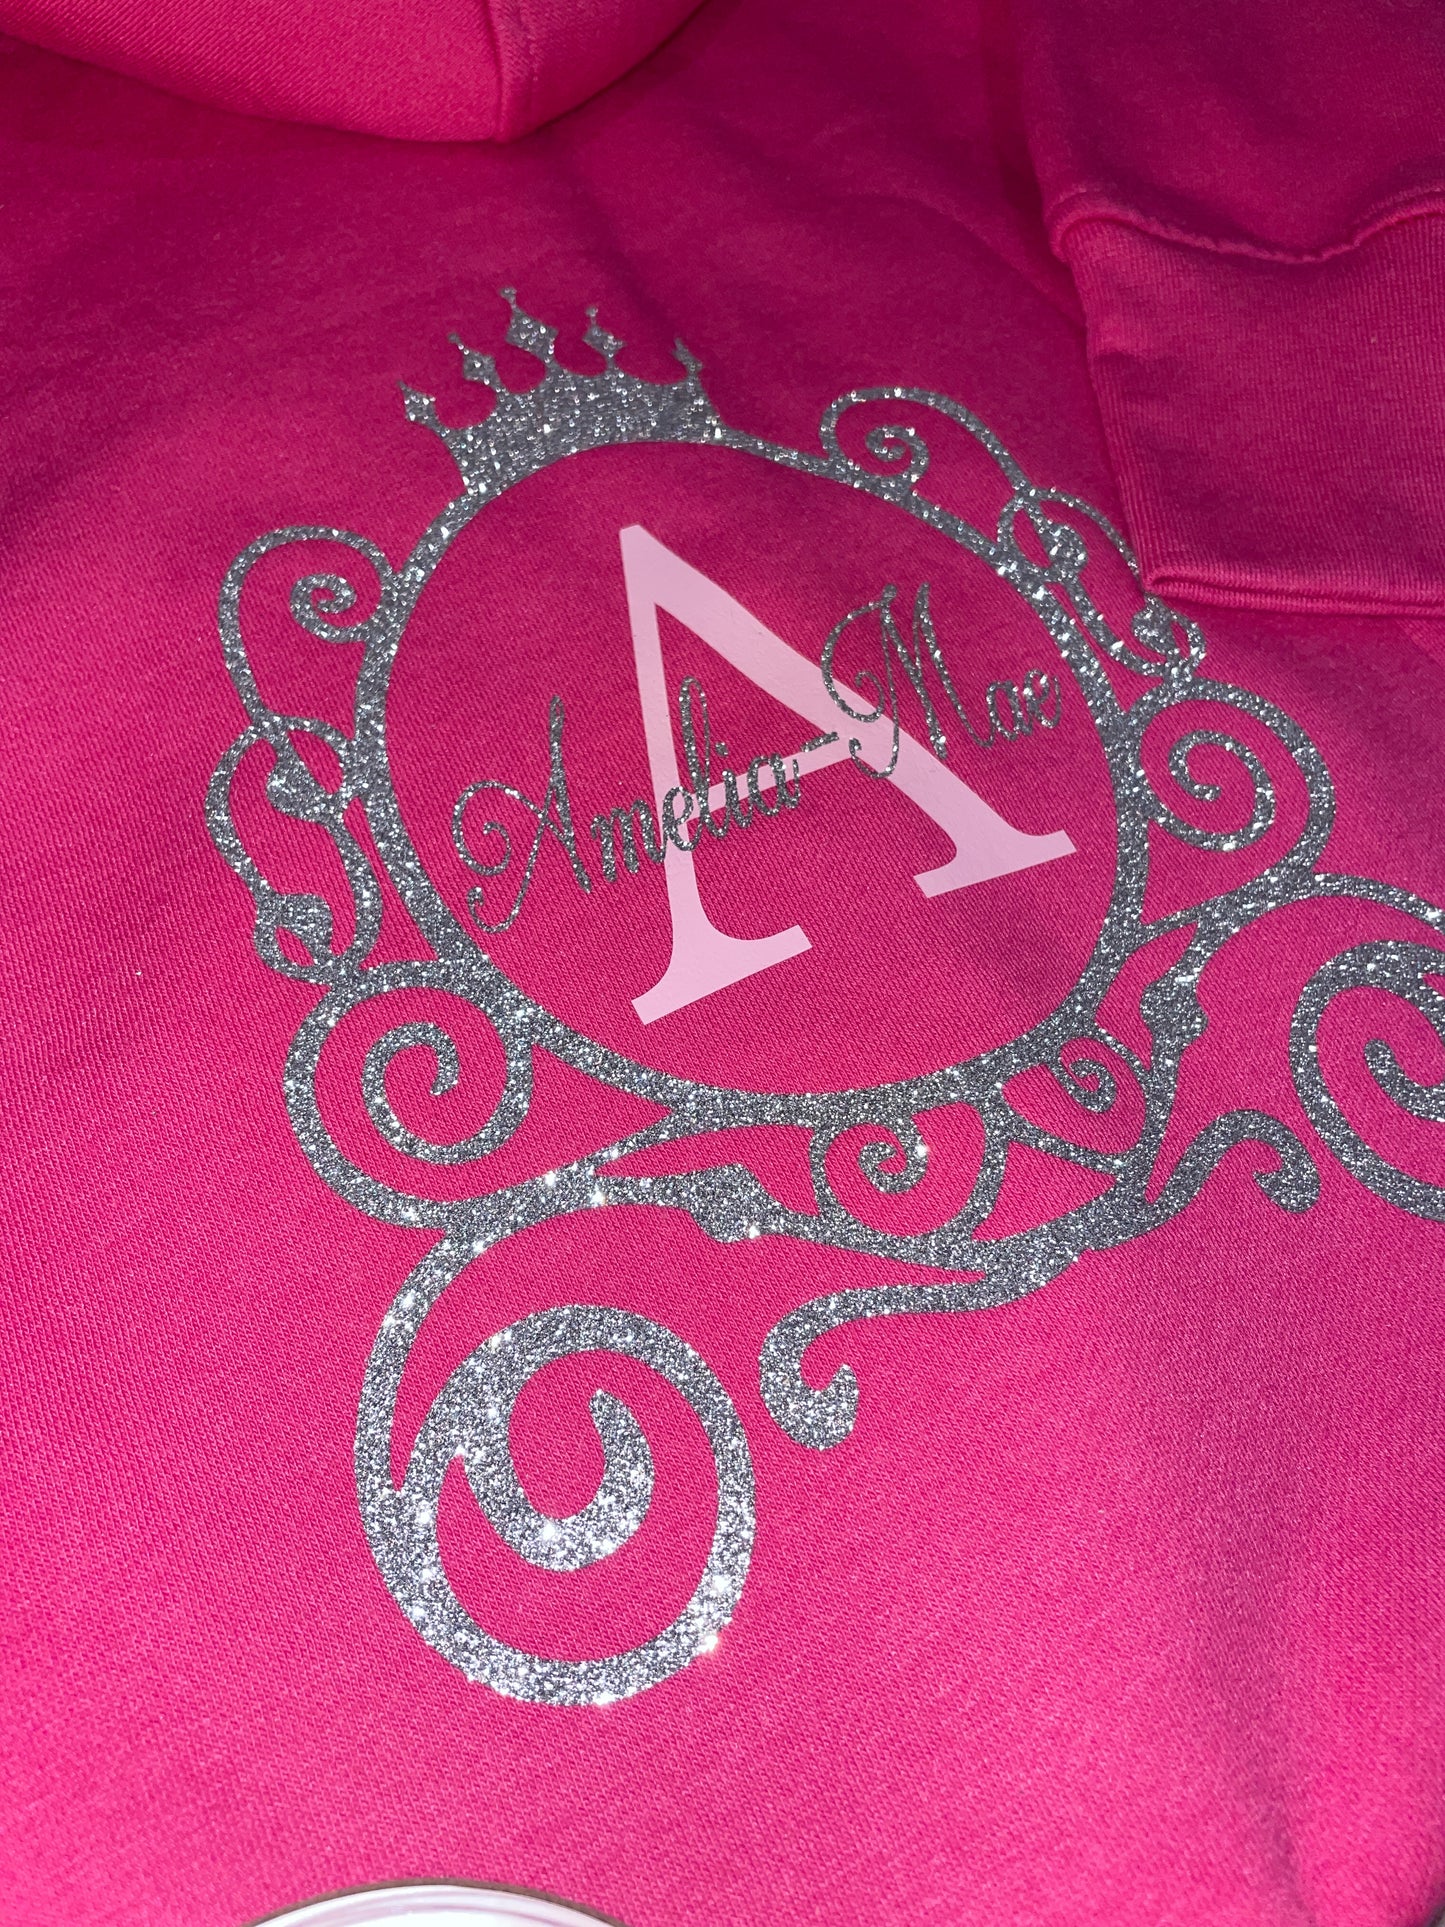 Personalised Fleece Lined Onesie - Princess Carriage Name / Initial - 6-12m to 11-12y